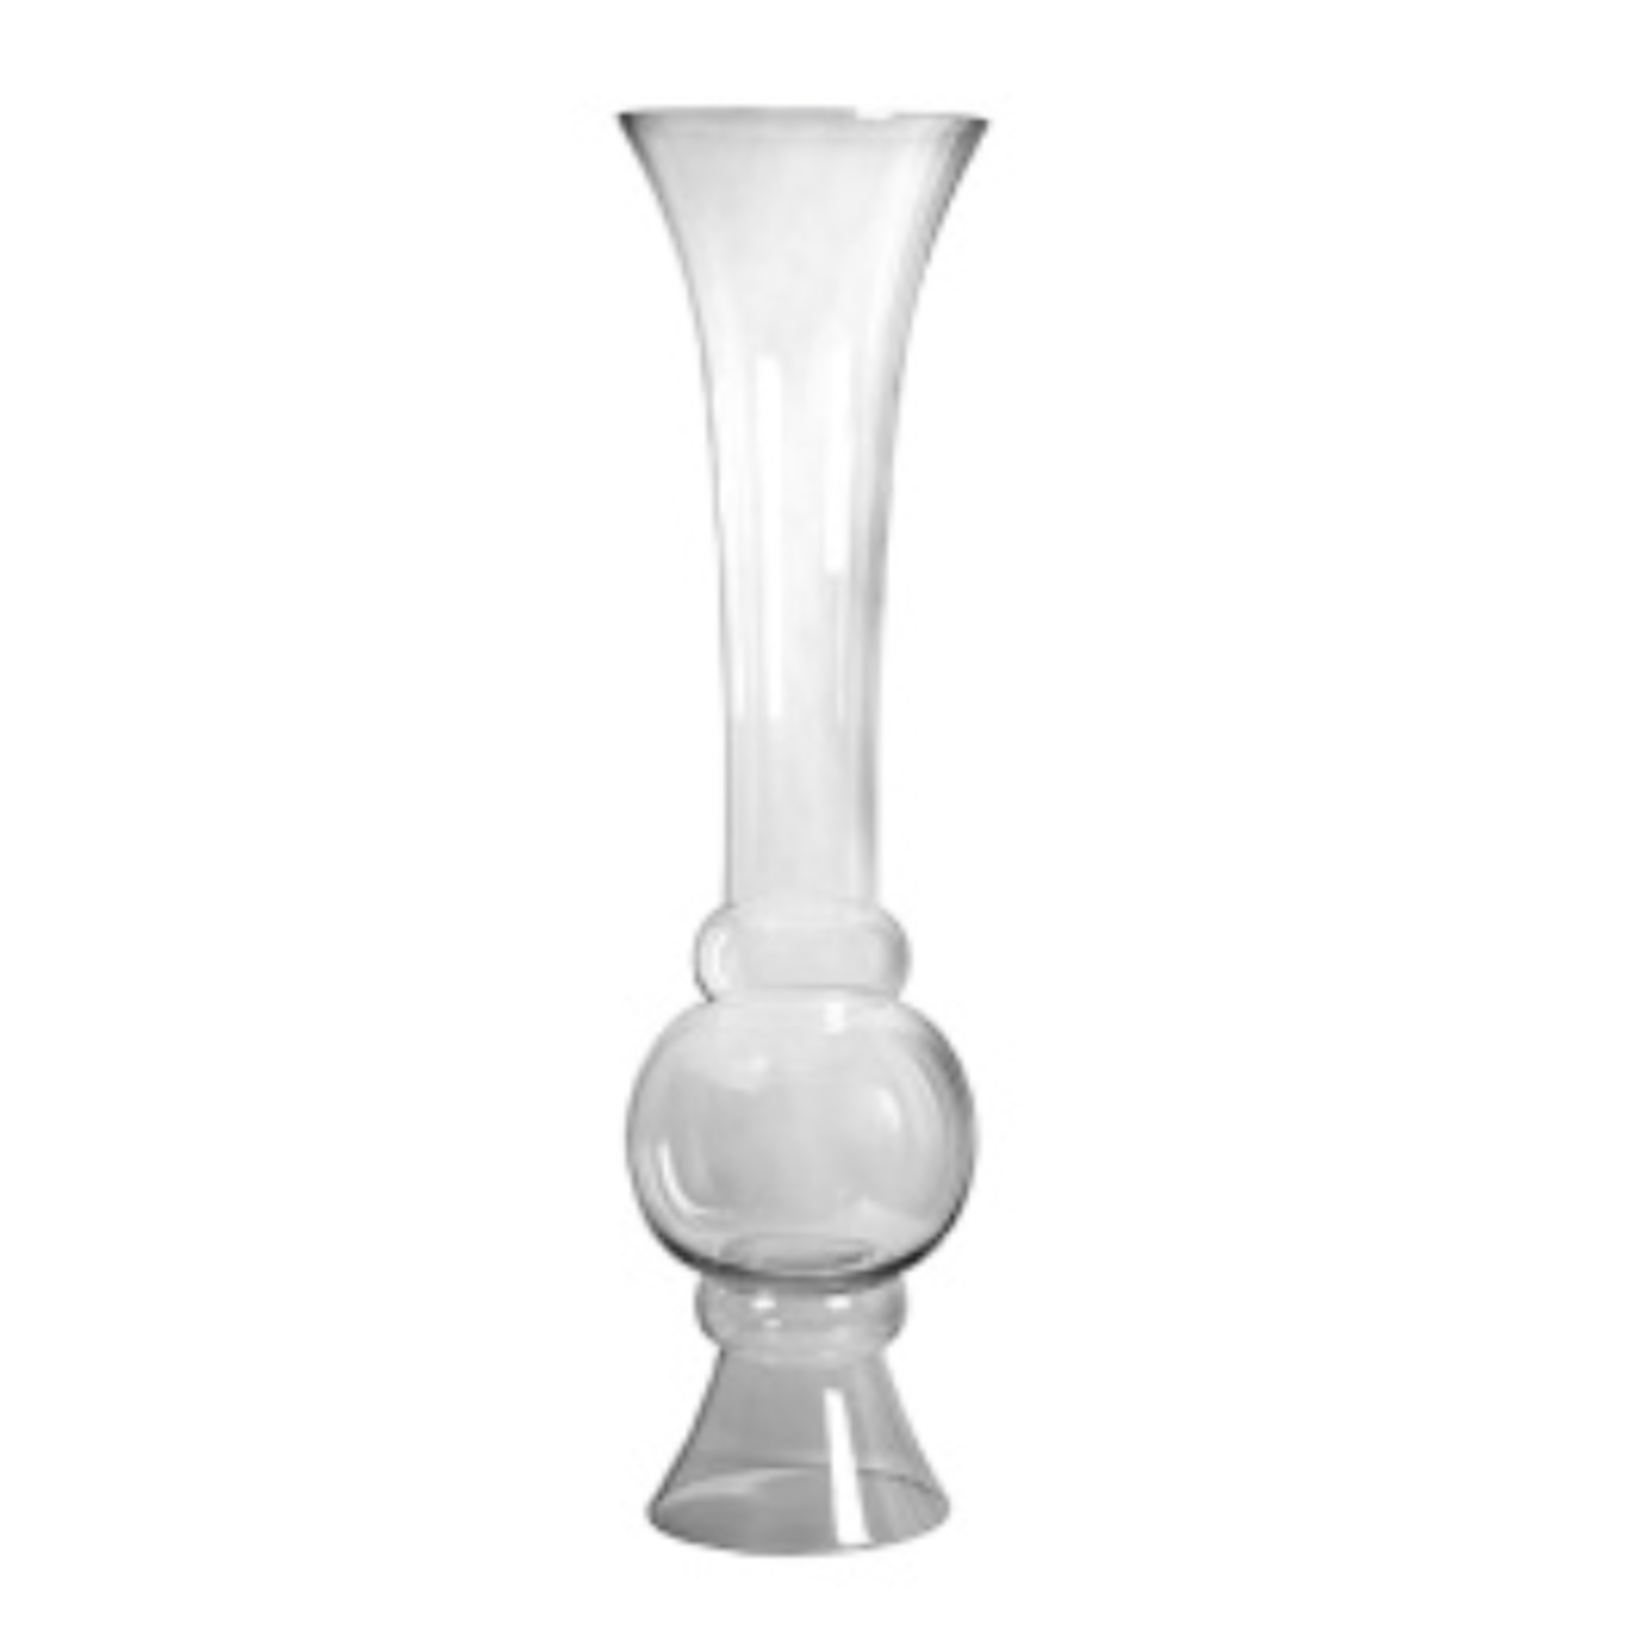 50% OFF WAS $190 NOW $95. 49.25”H X 11.5” EXTRA LARGE GLASS DOUBLE/REVERSIBLE TRUMPET VASE